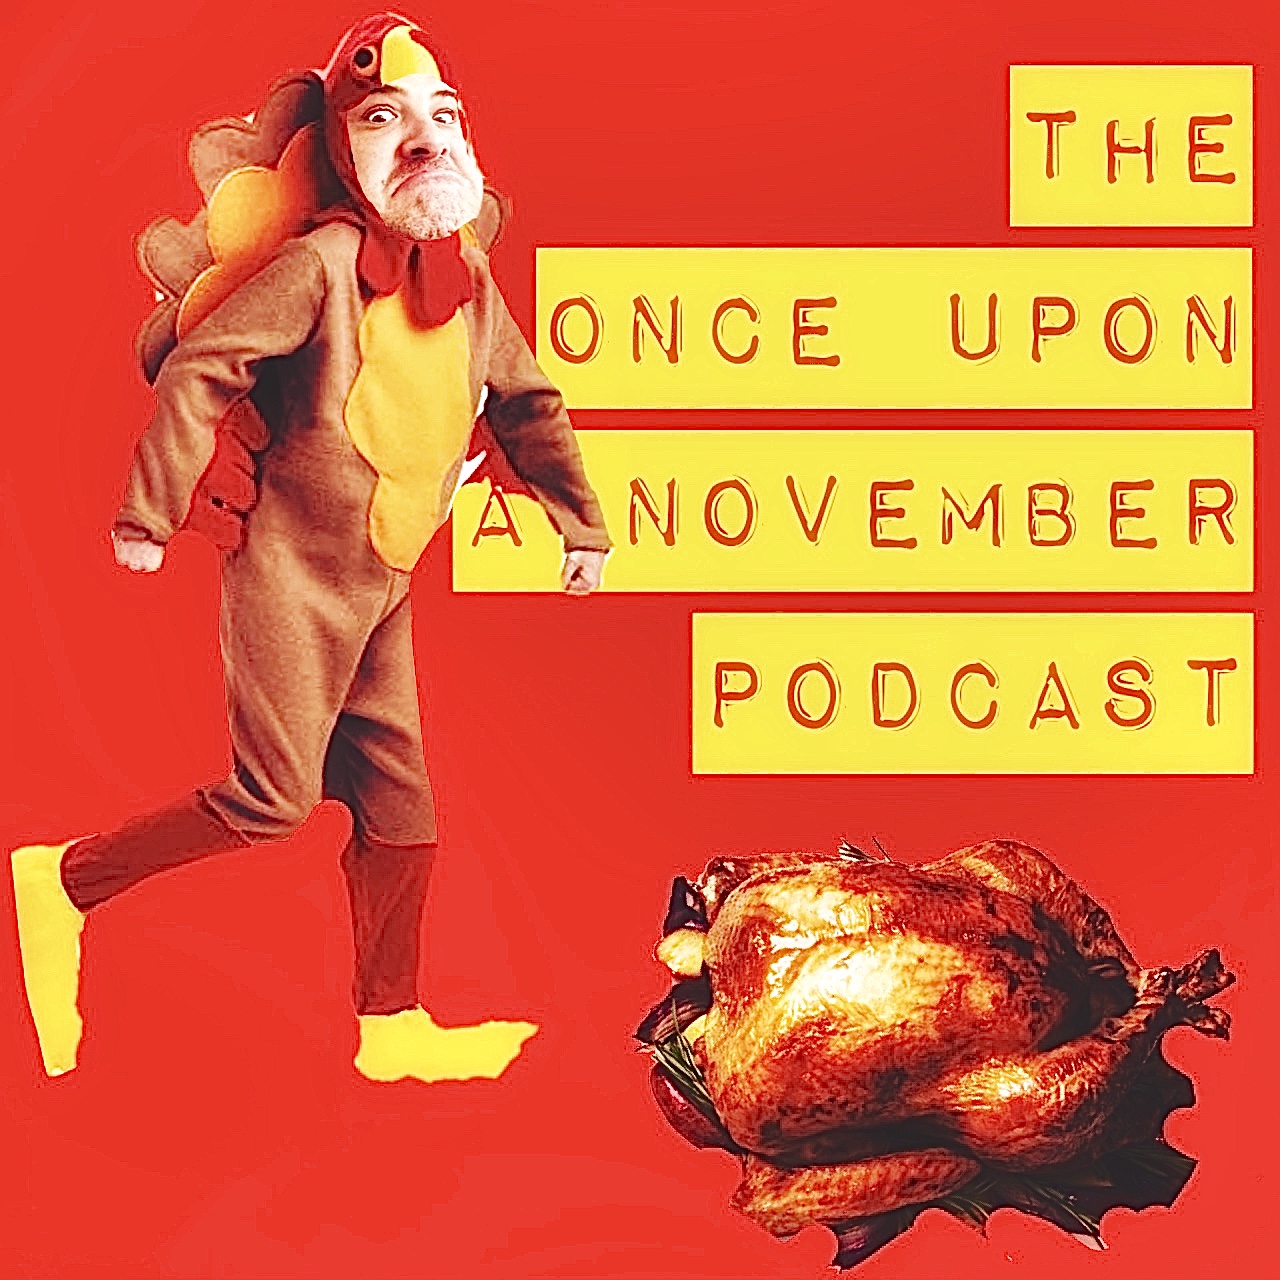 Once upon a November Podcast